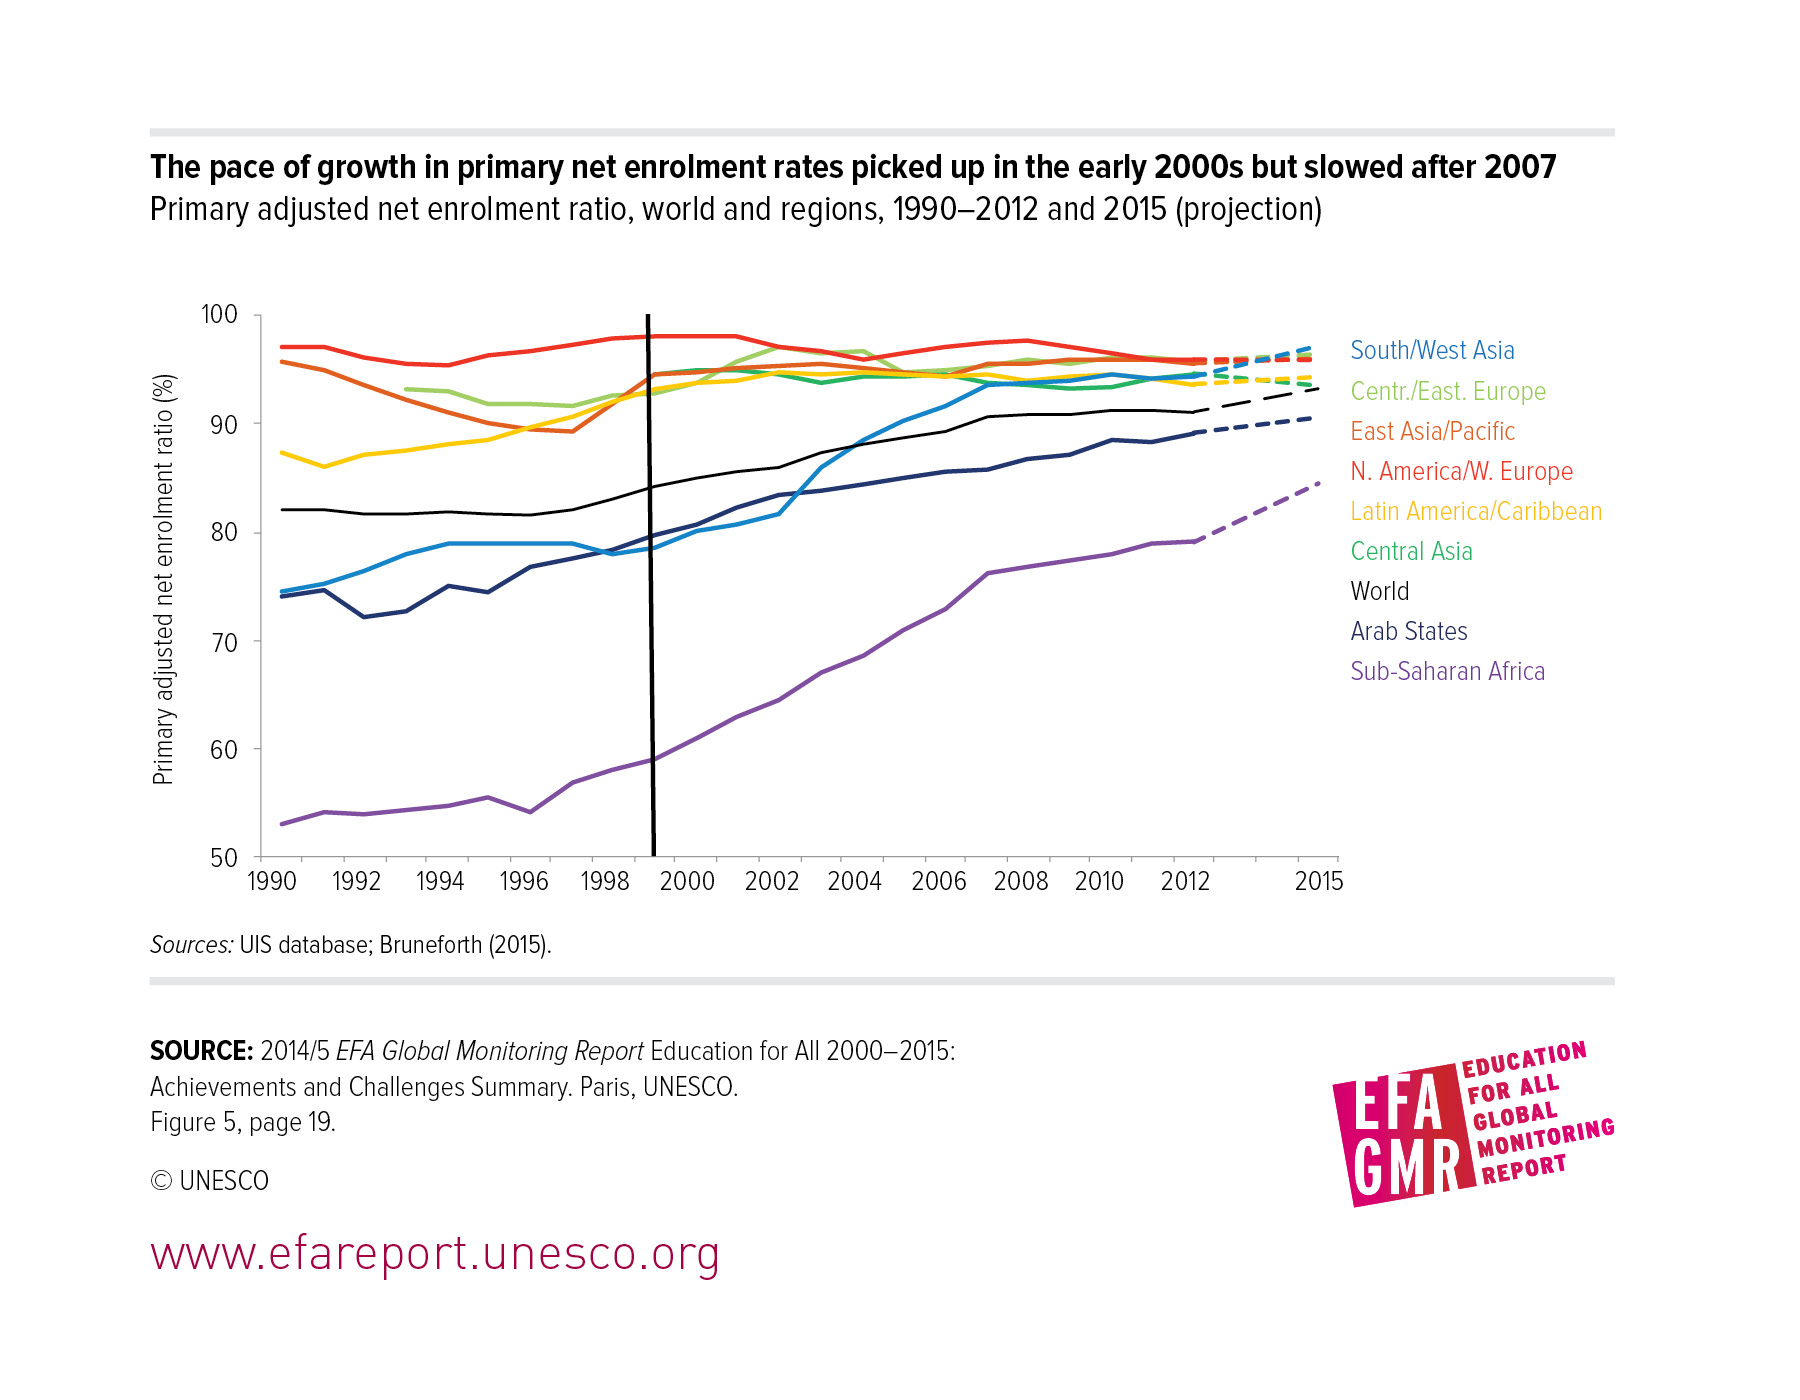 The pace of growth in primary net enrolment rates picked up in the early 2000s but slowed after 2007